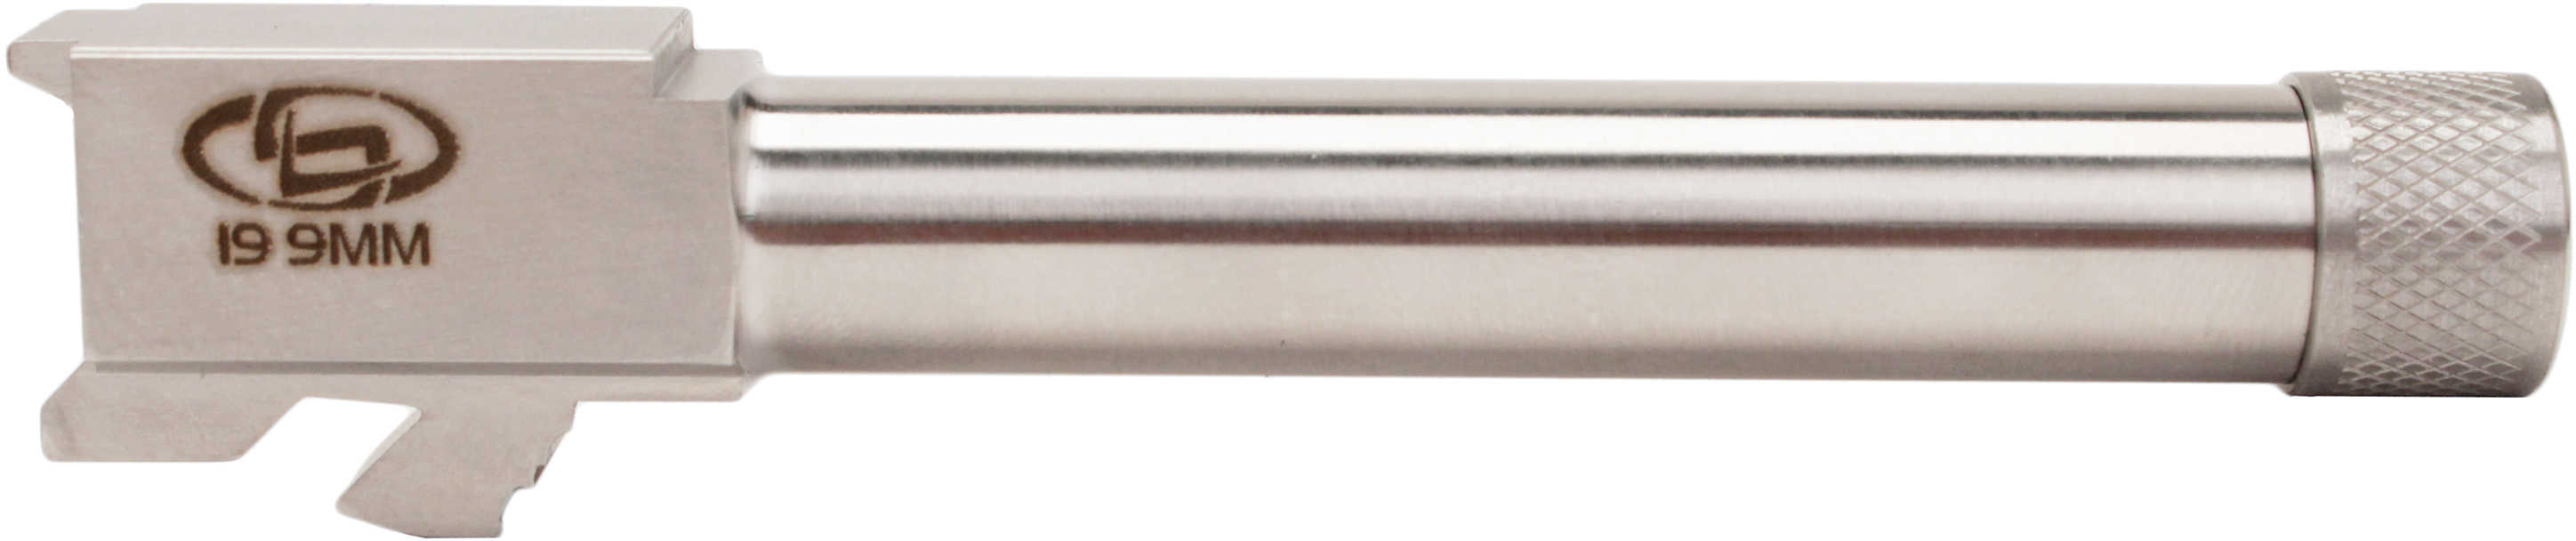 StormLake Barrels Lake 9MM 4.72" Stainless With Thread Protector Threaded 1/2-28 for Glock 19 -AT GL-19-9MM-472-OP-01T